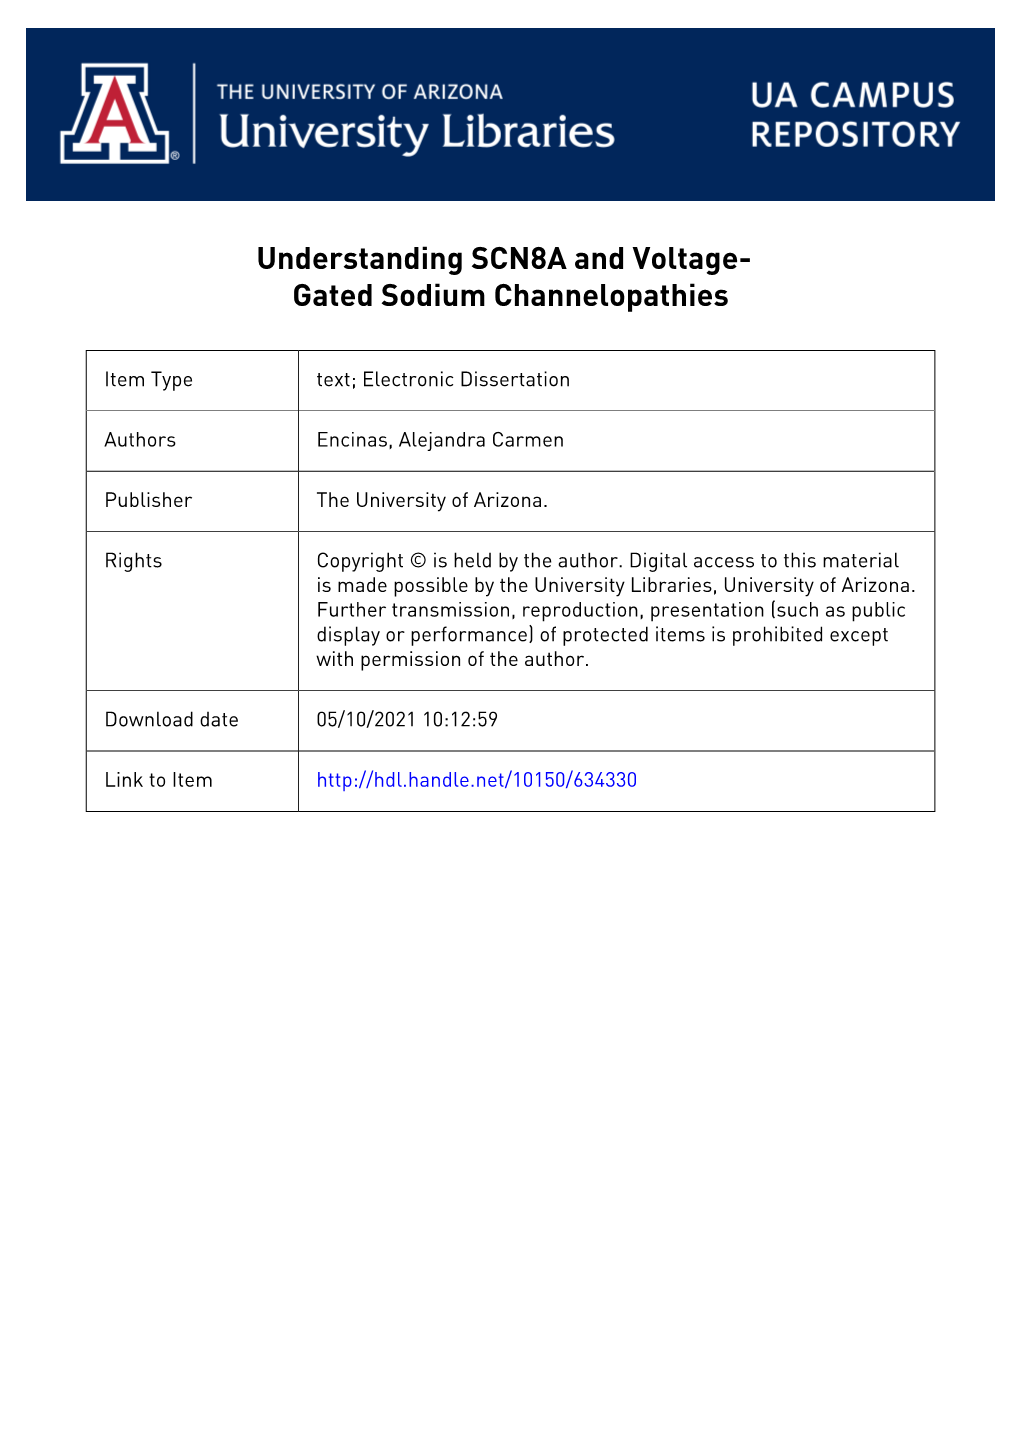 Understanding Scn8a and Voltage-Gated Sodium Channelopathies